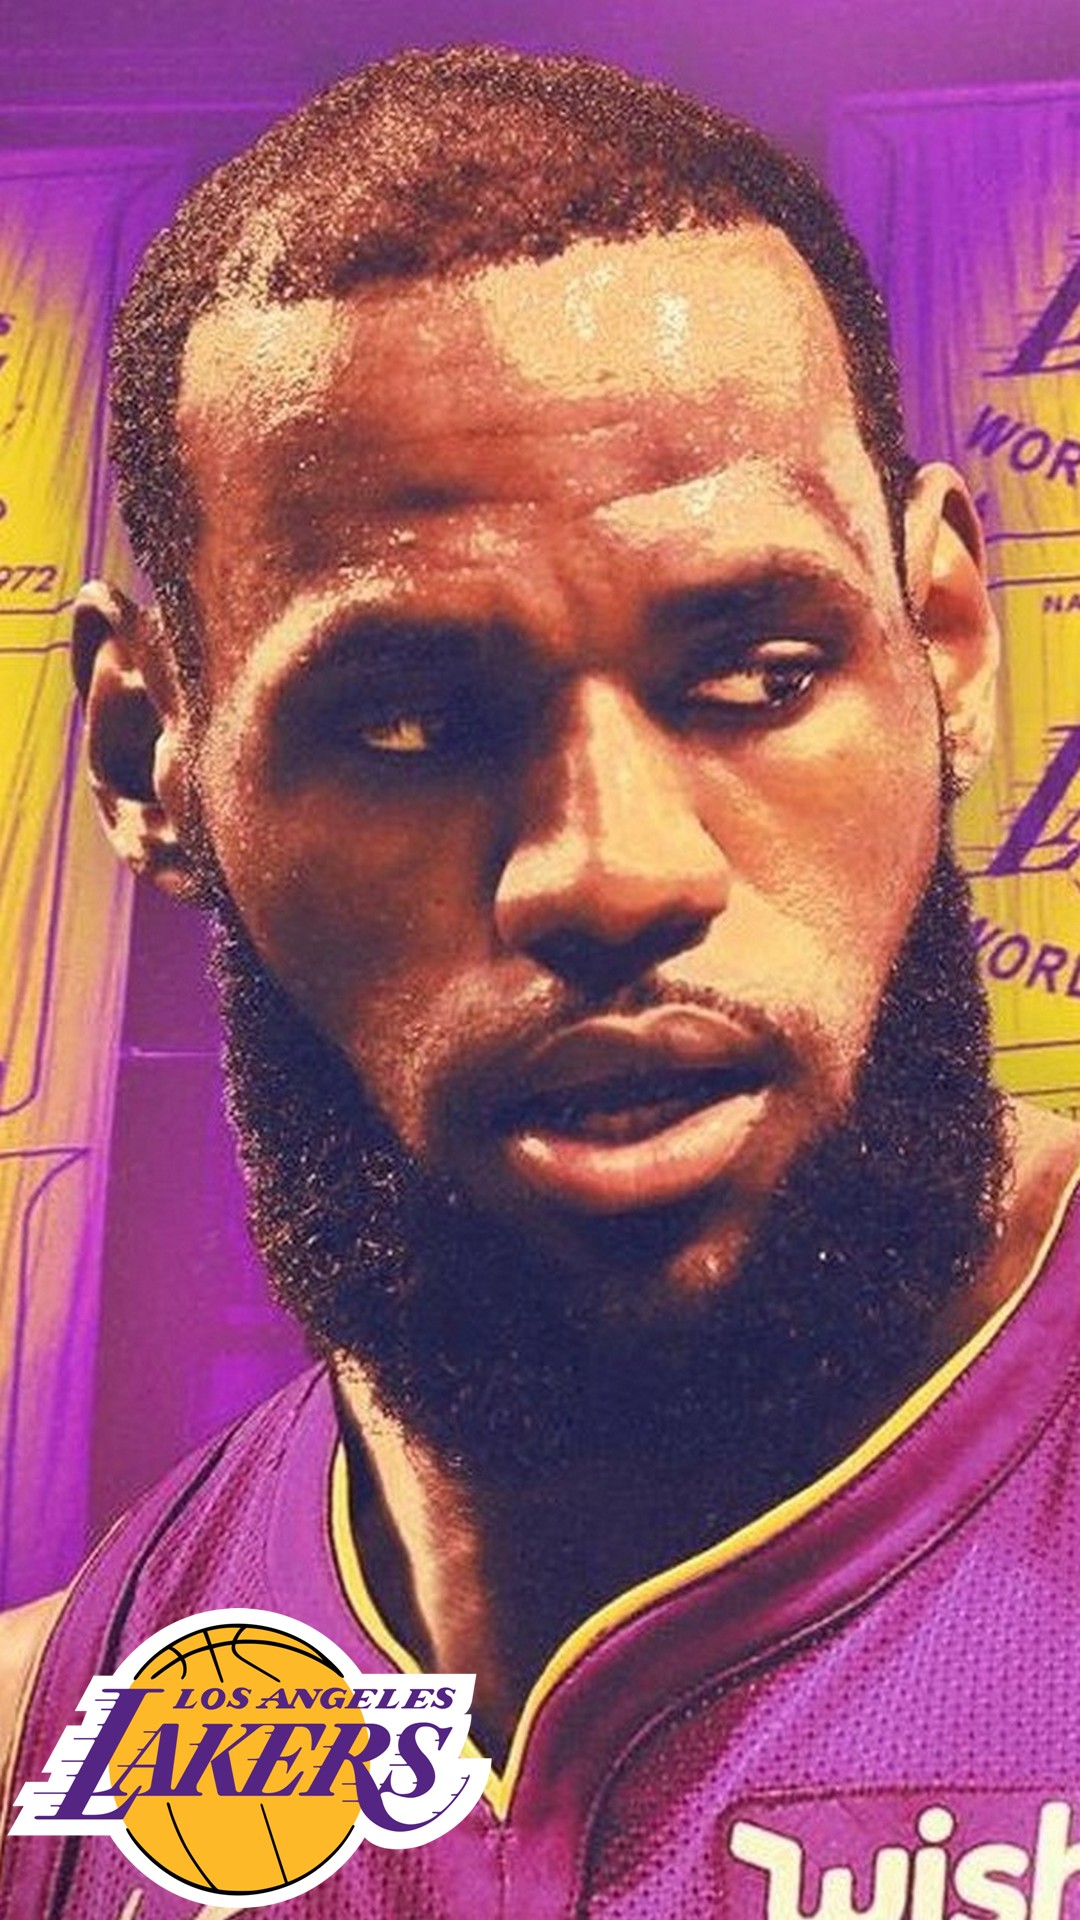 LeBron James Lakers iPhone 7 Plus Wallpaper with image dimensions 1080x1920 pixel. You can make this wallpaper for your Desktop Computer Backgrounds, Windows or Mac Screensavers, iPhone Lock screen, Tablet or Android and another Mobile Phone device